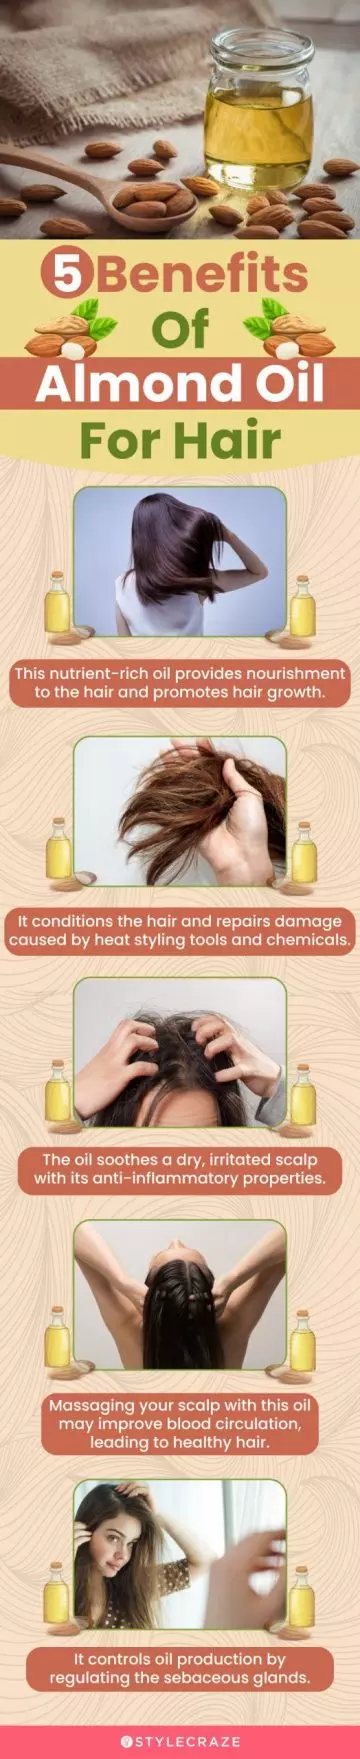 5 benefits of almond oil for hair (infographic)